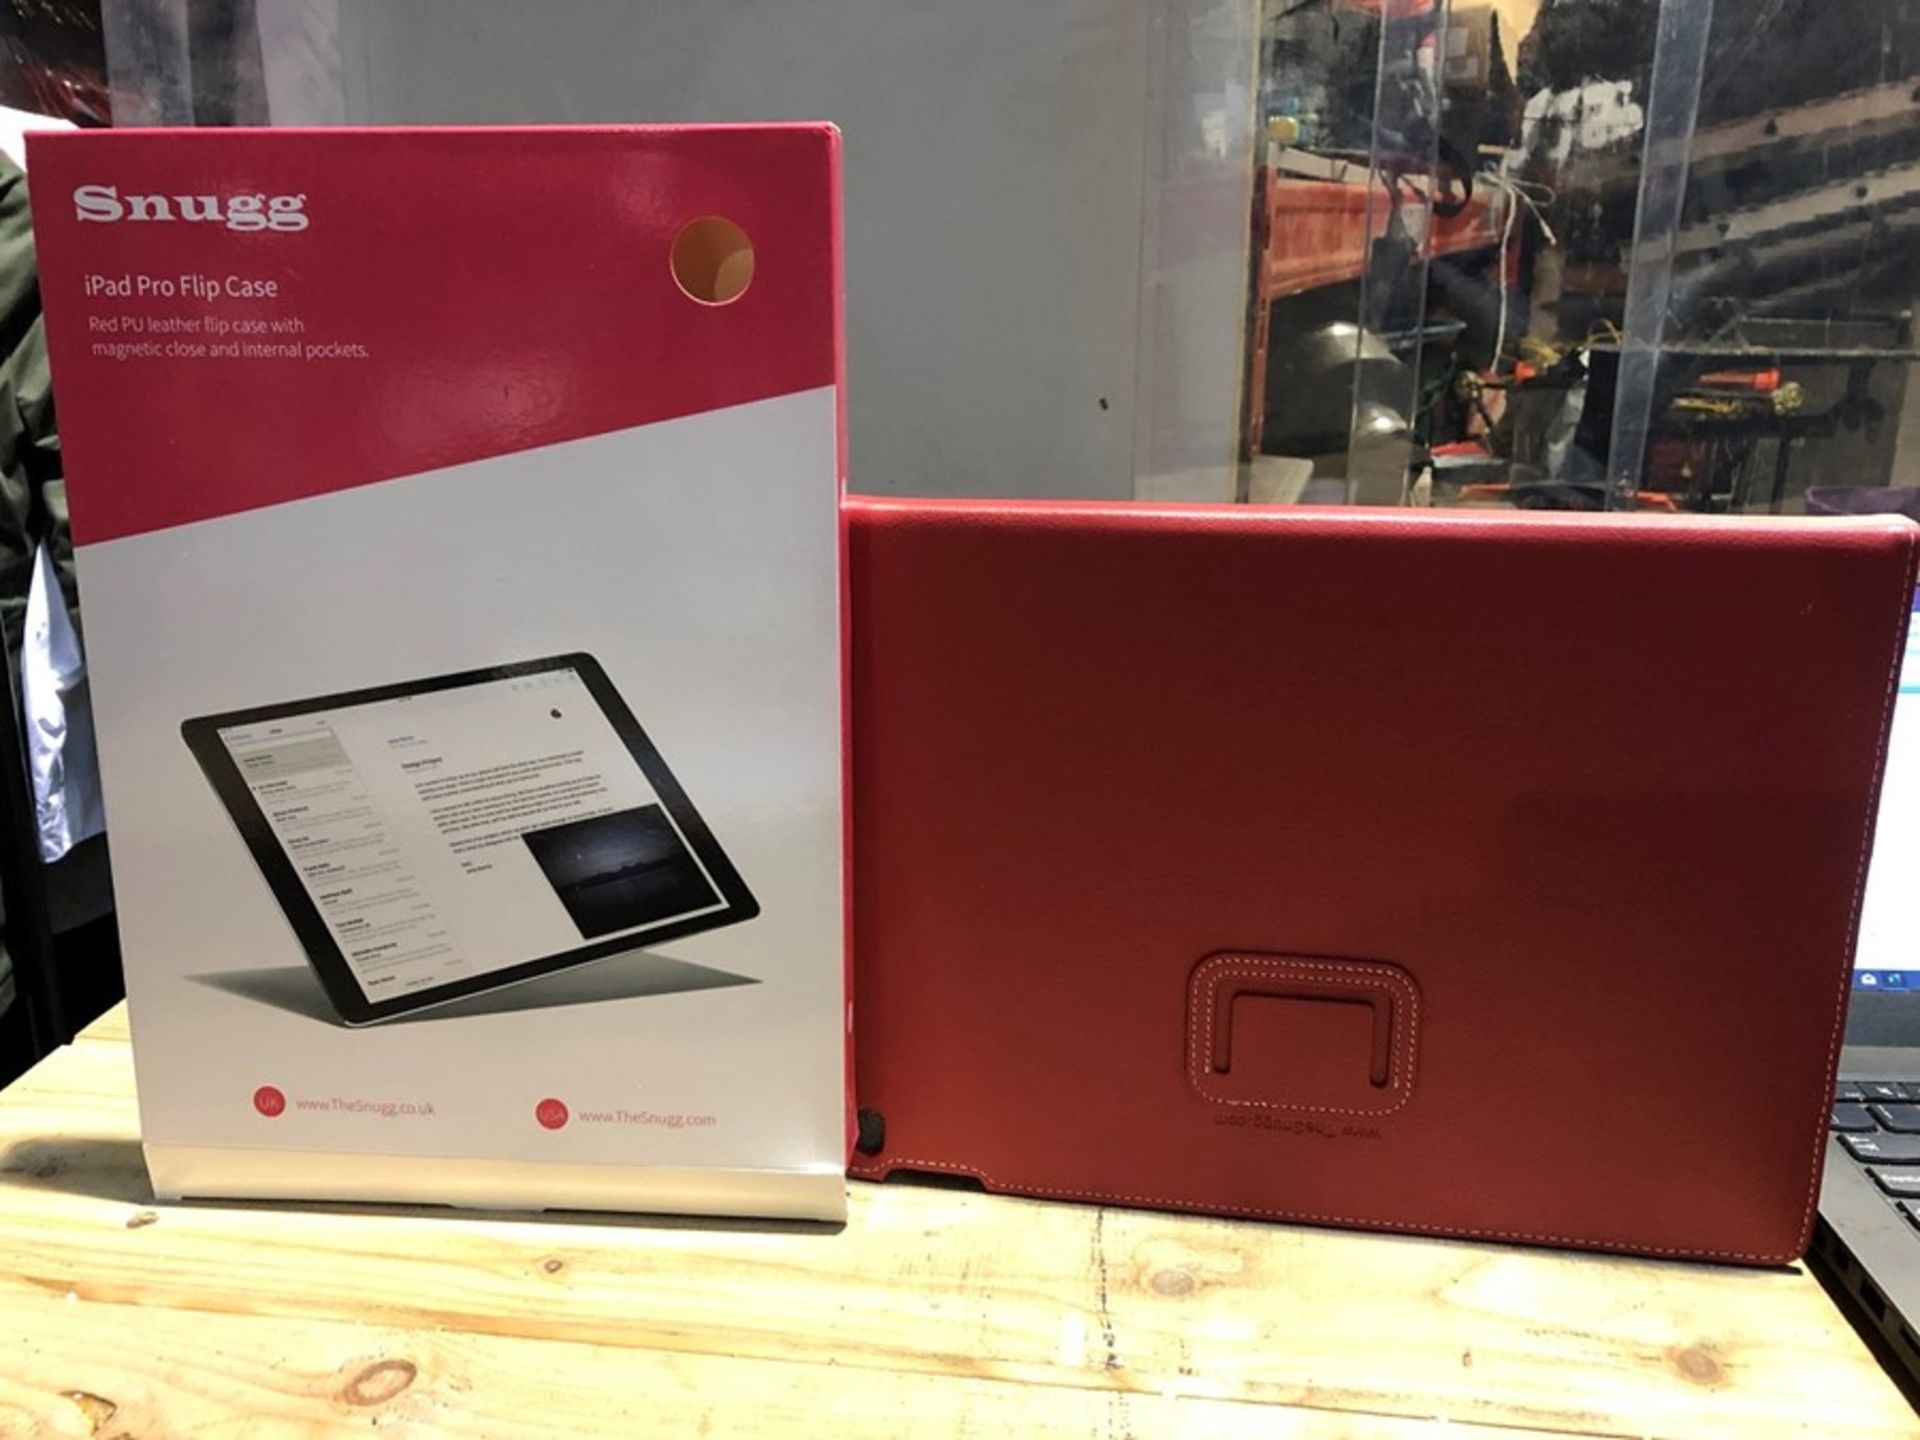 1 BOXED SNUGG IPAD PRO FLIP CASE 12.9 INCH IN RED / RRP £24.99 (PUBLIC VIEWING AVAILABLE)